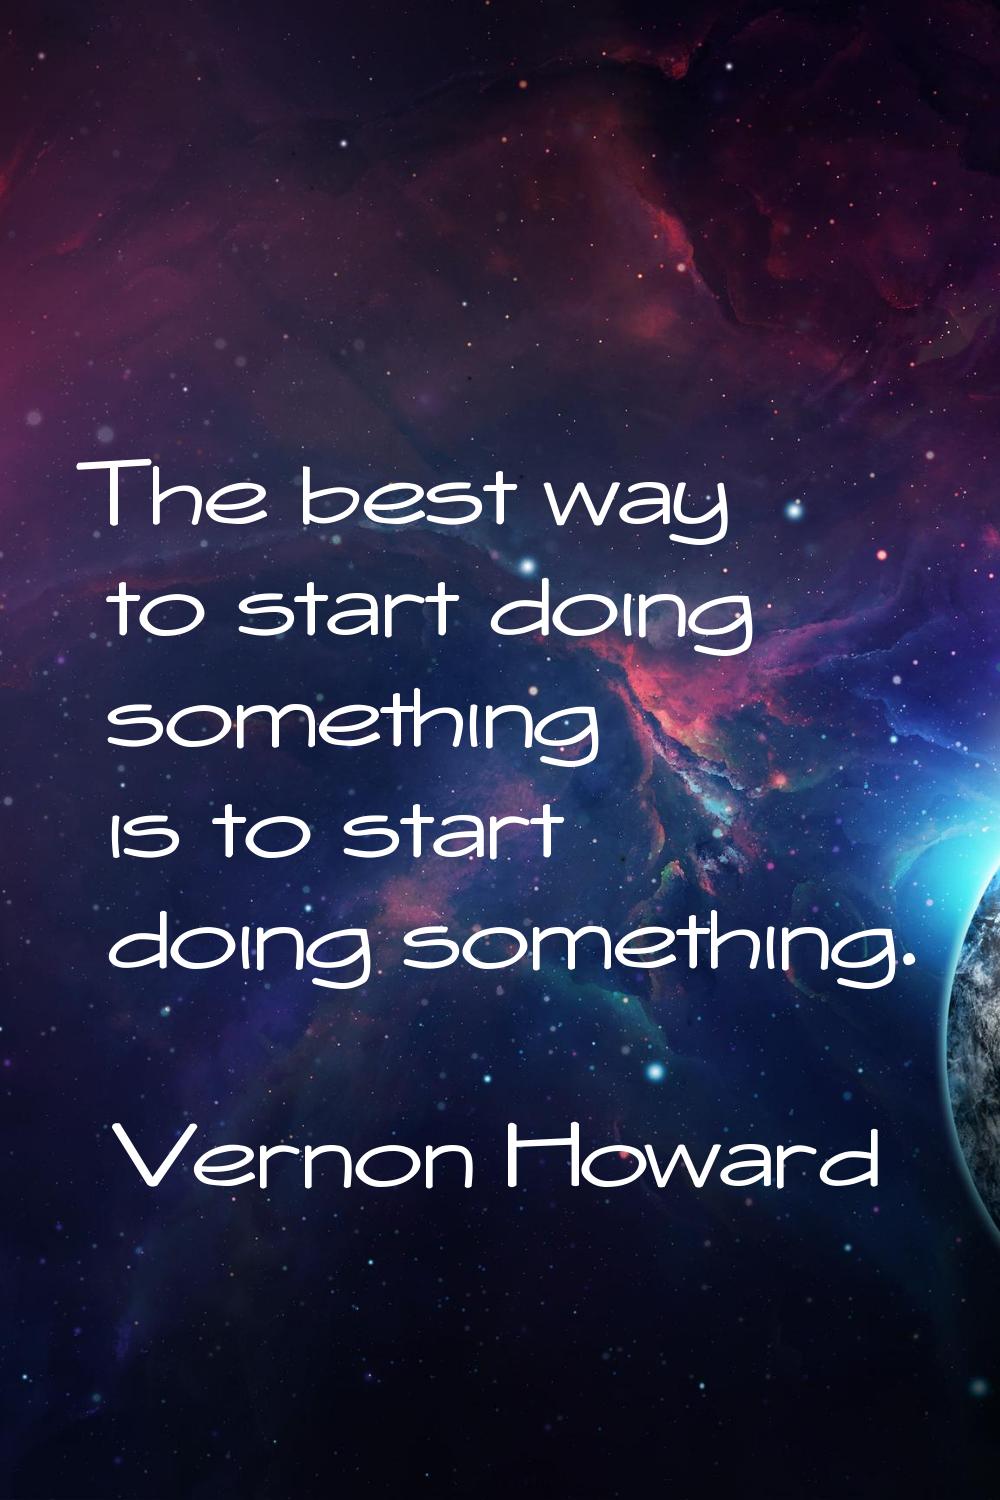 The best way to start doing something is to start doing something.